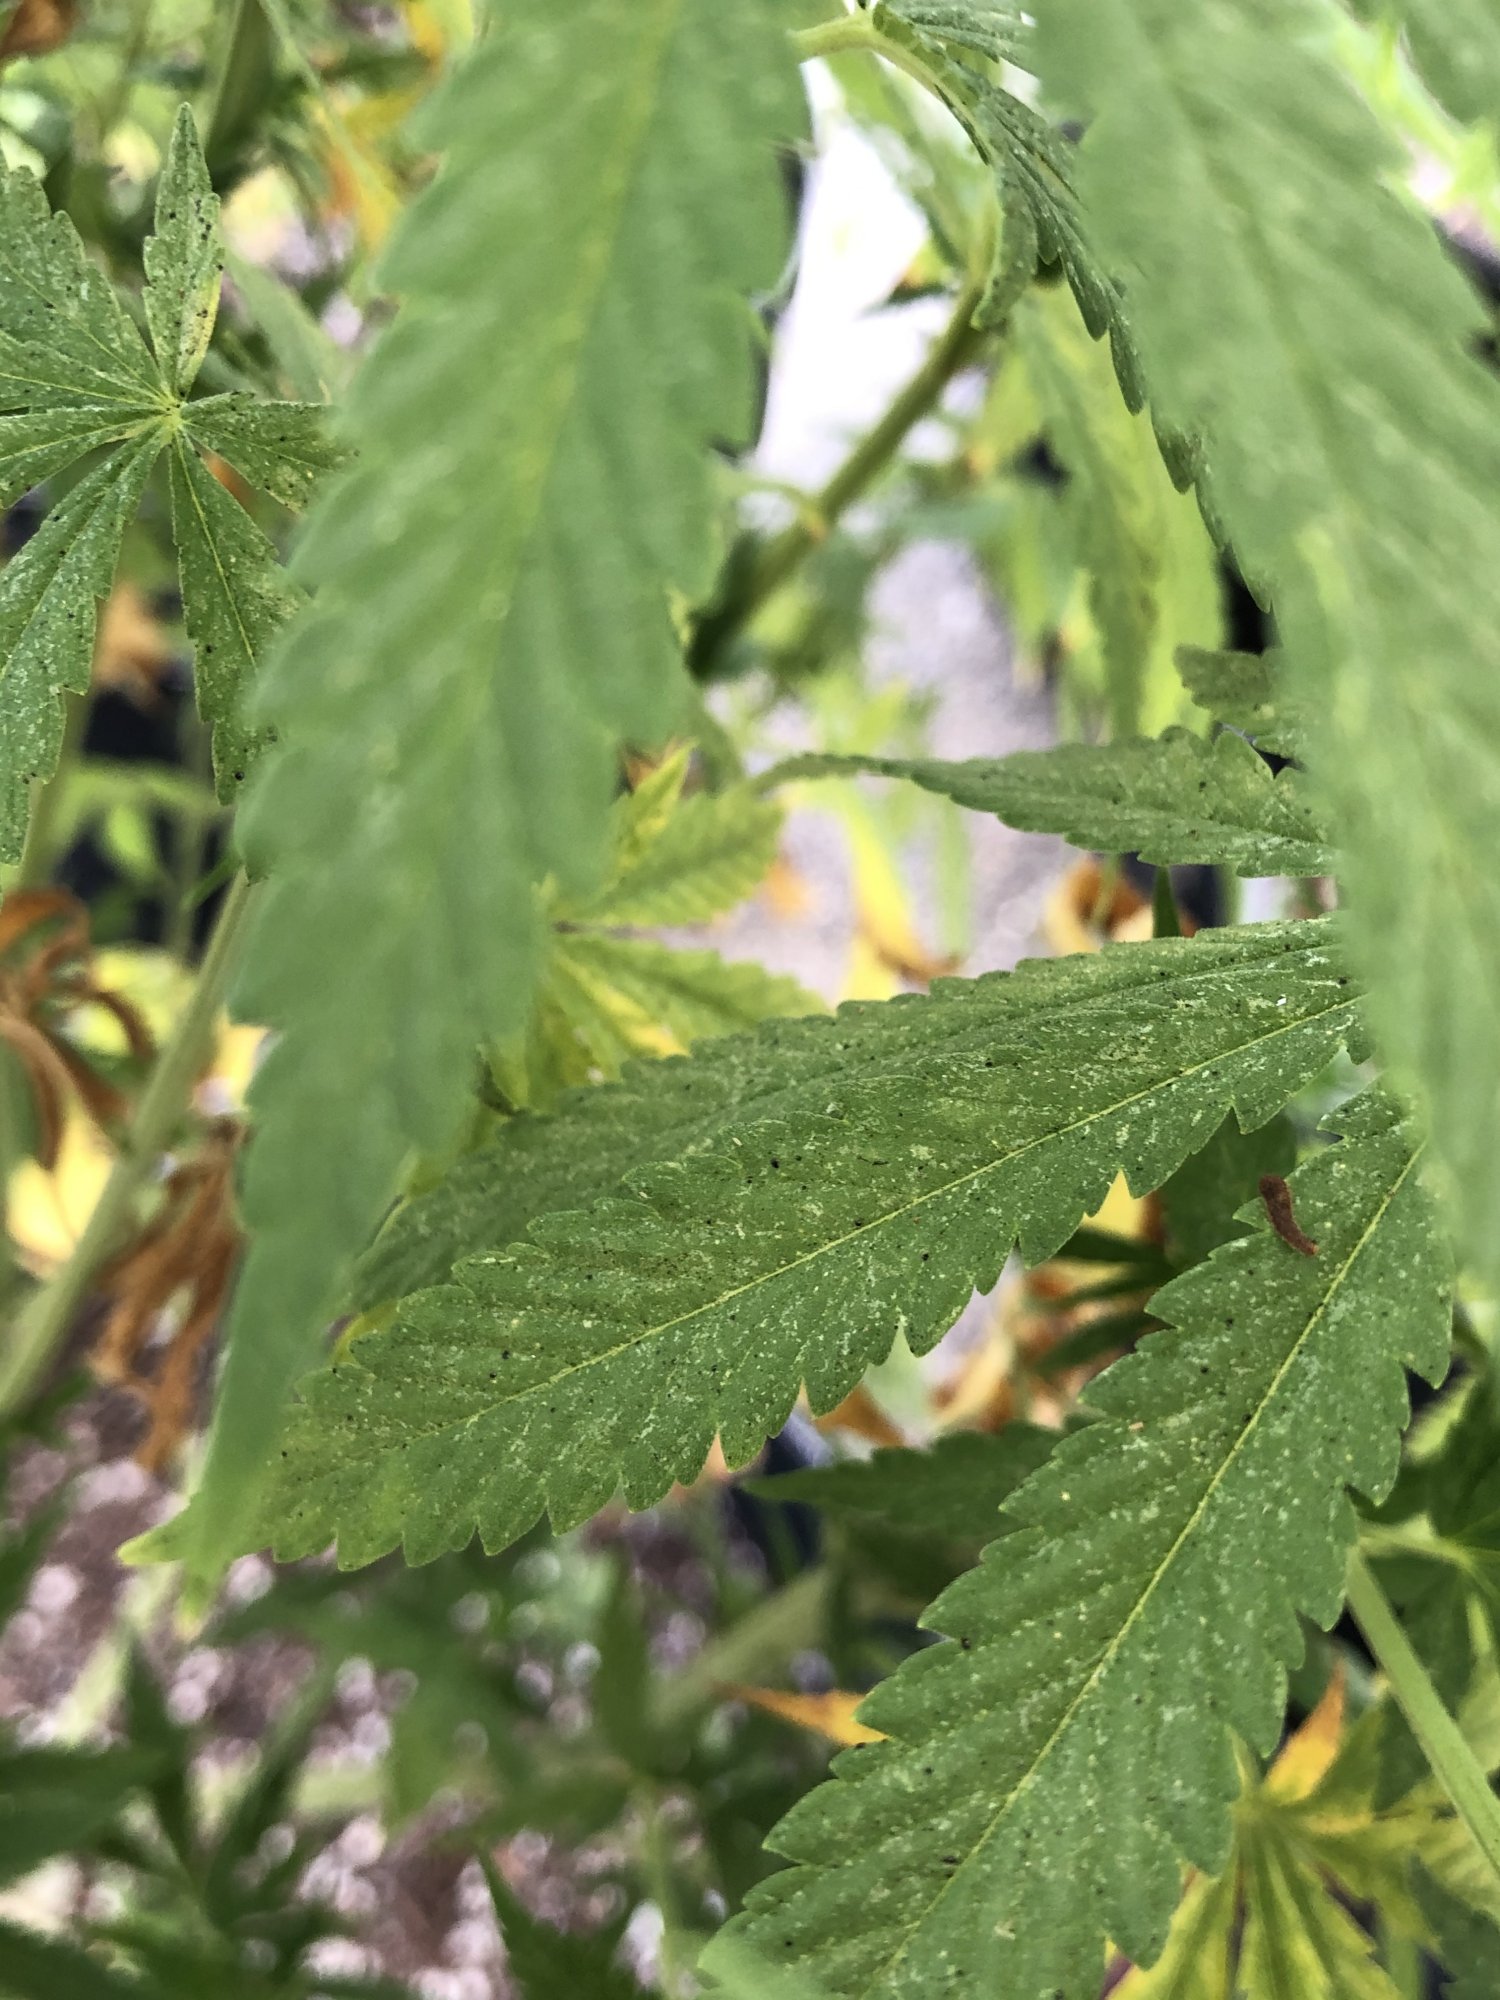 Black spots on leaves and stems please help 11